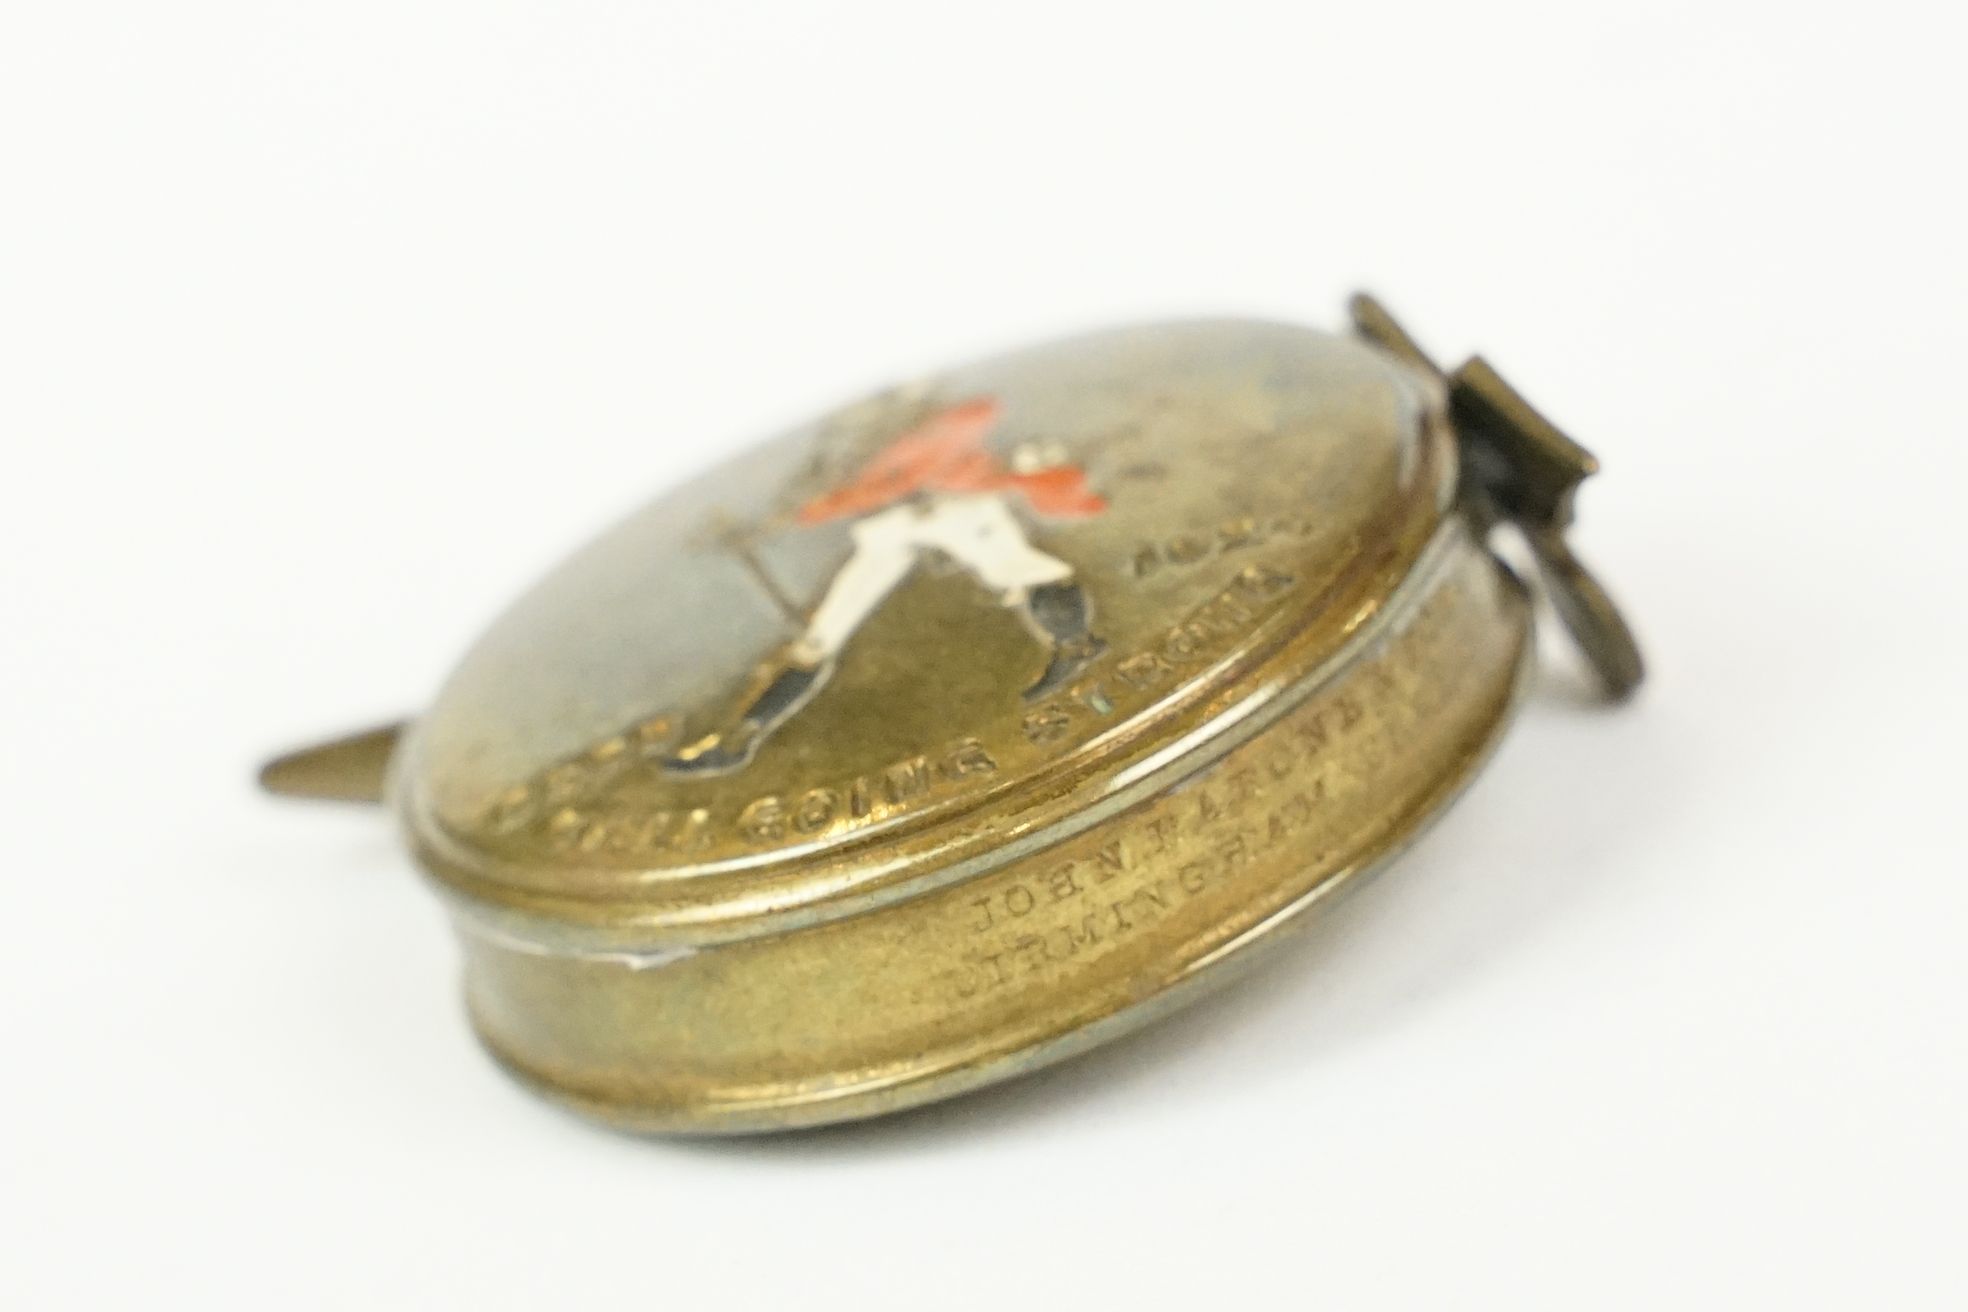 Early 20th century ' Johnnie Walker ' Whiskey Enamelled Bowls Tape Measure marked ' born 1820, still - Image 3 of 6